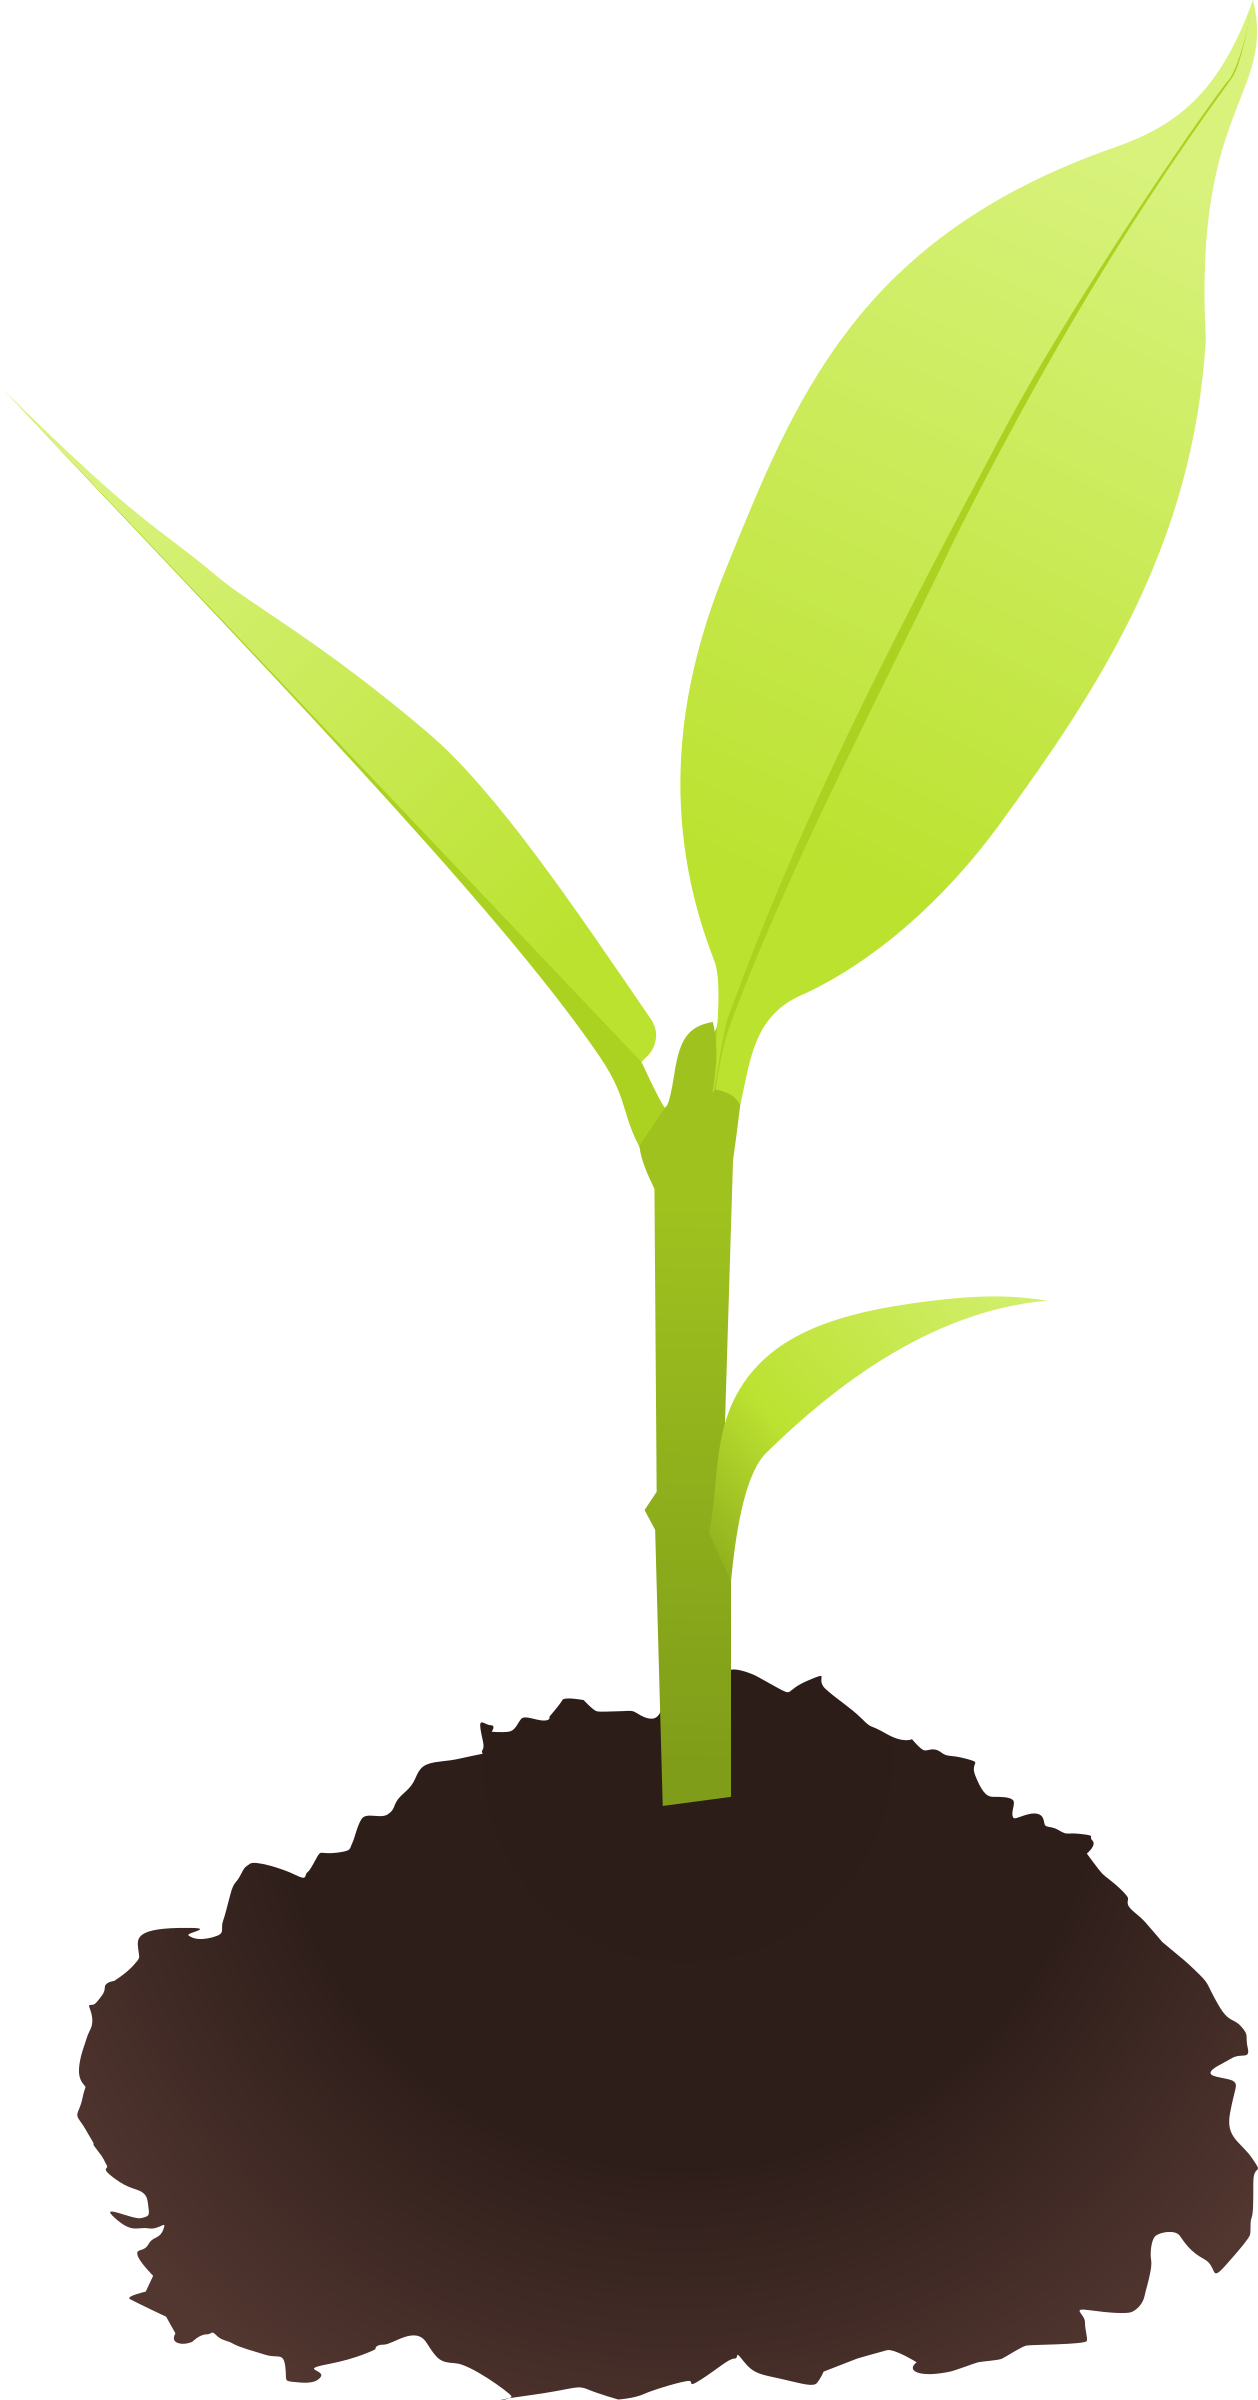 Bud seed pencil and. Dirt clipart small plant